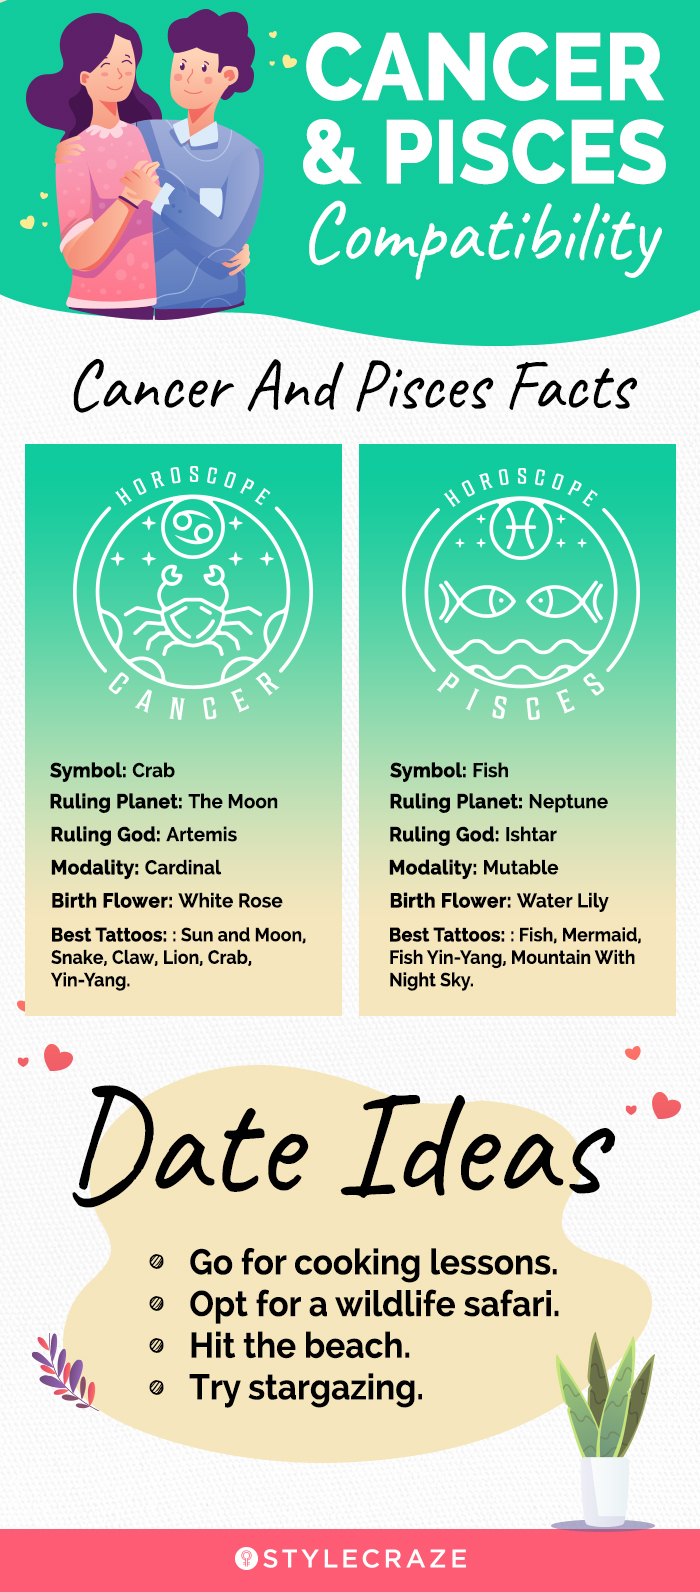 cancer and pisces compatibility [infographic]